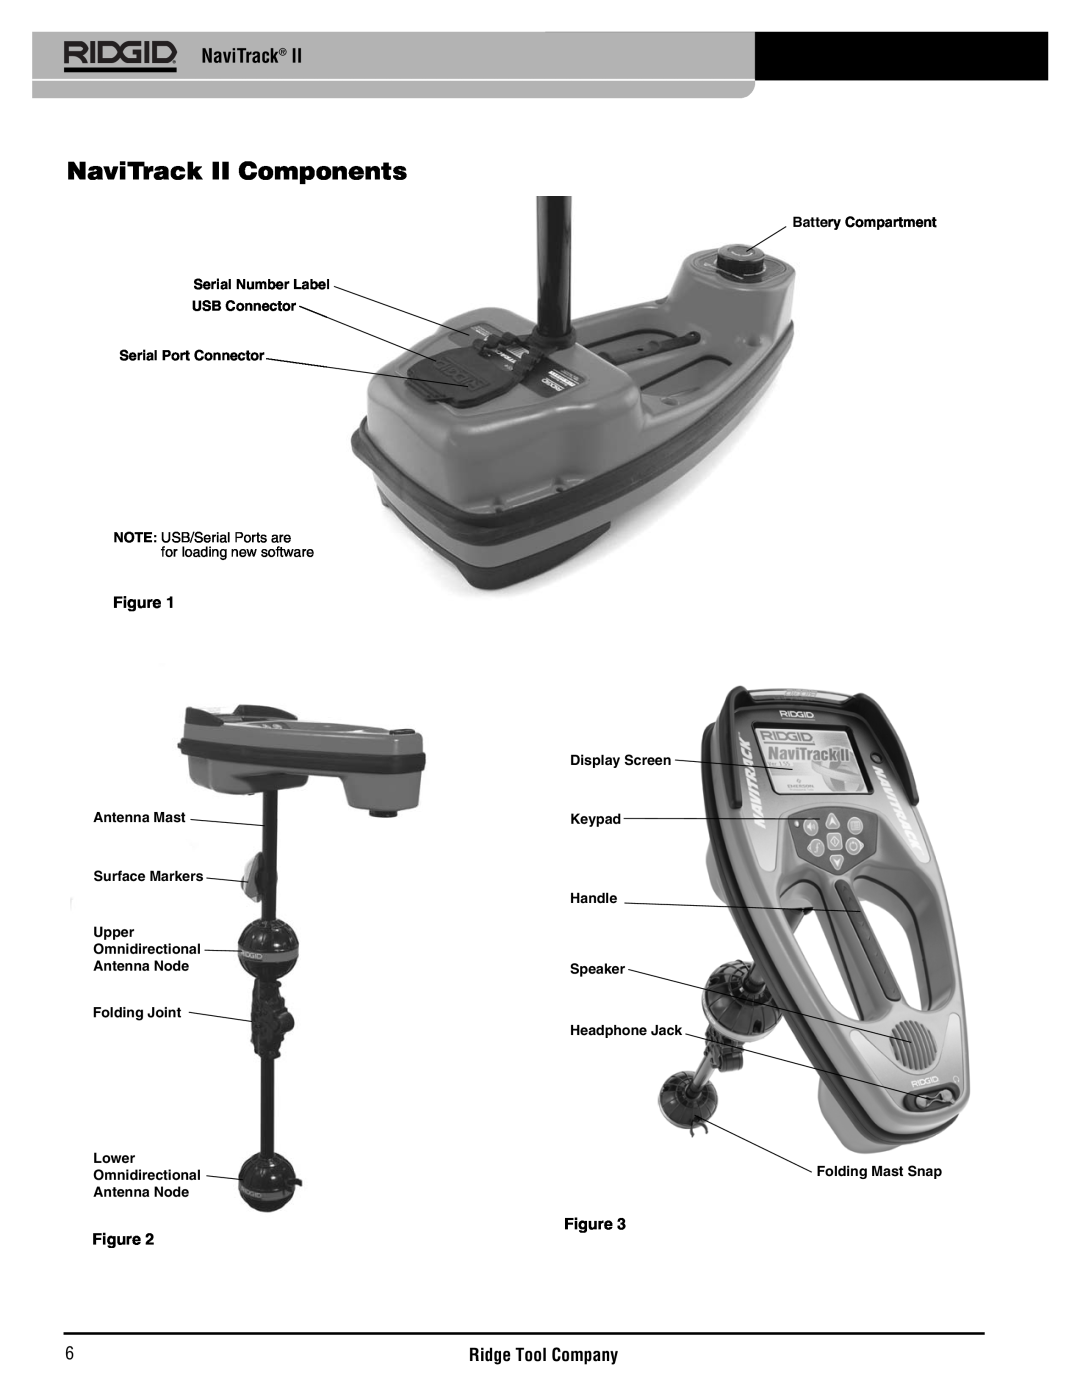 RIDGID Metal Detector manual NaviTrack II Components, NOTE USB/Serial Ports are for loading new software 